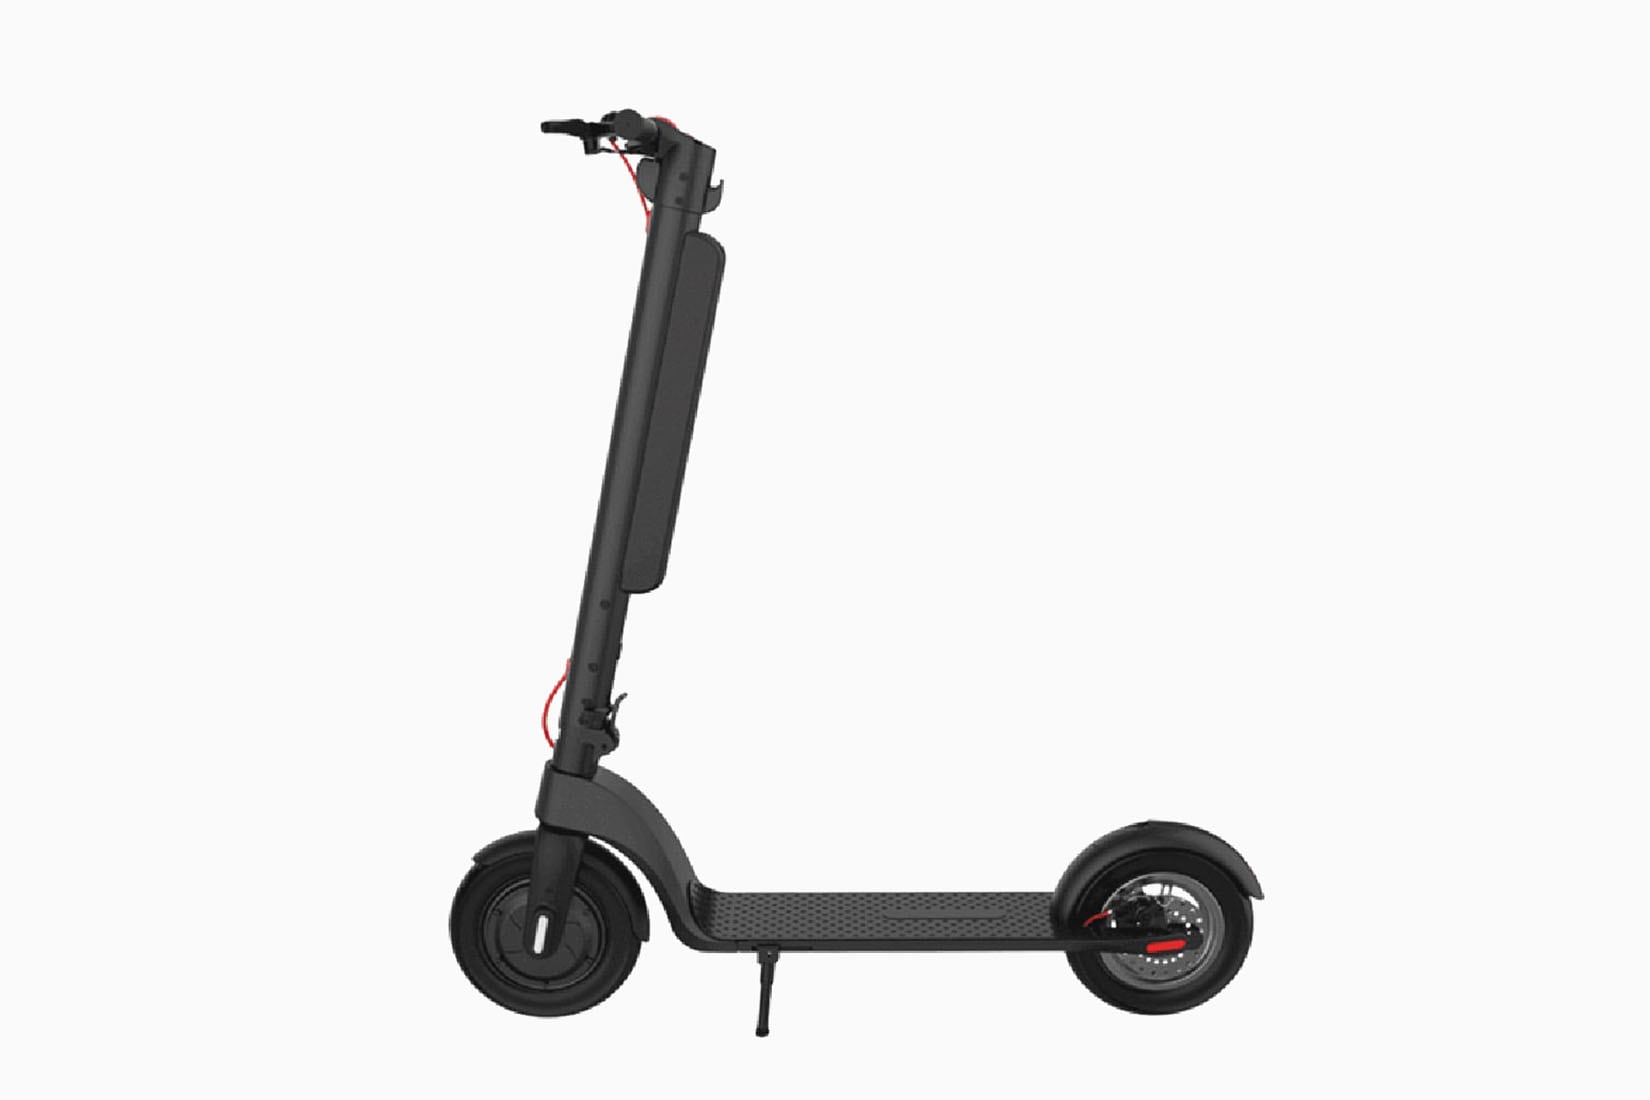 best electric scooter fastest speed turboant x7 pro review - Luxe Digital